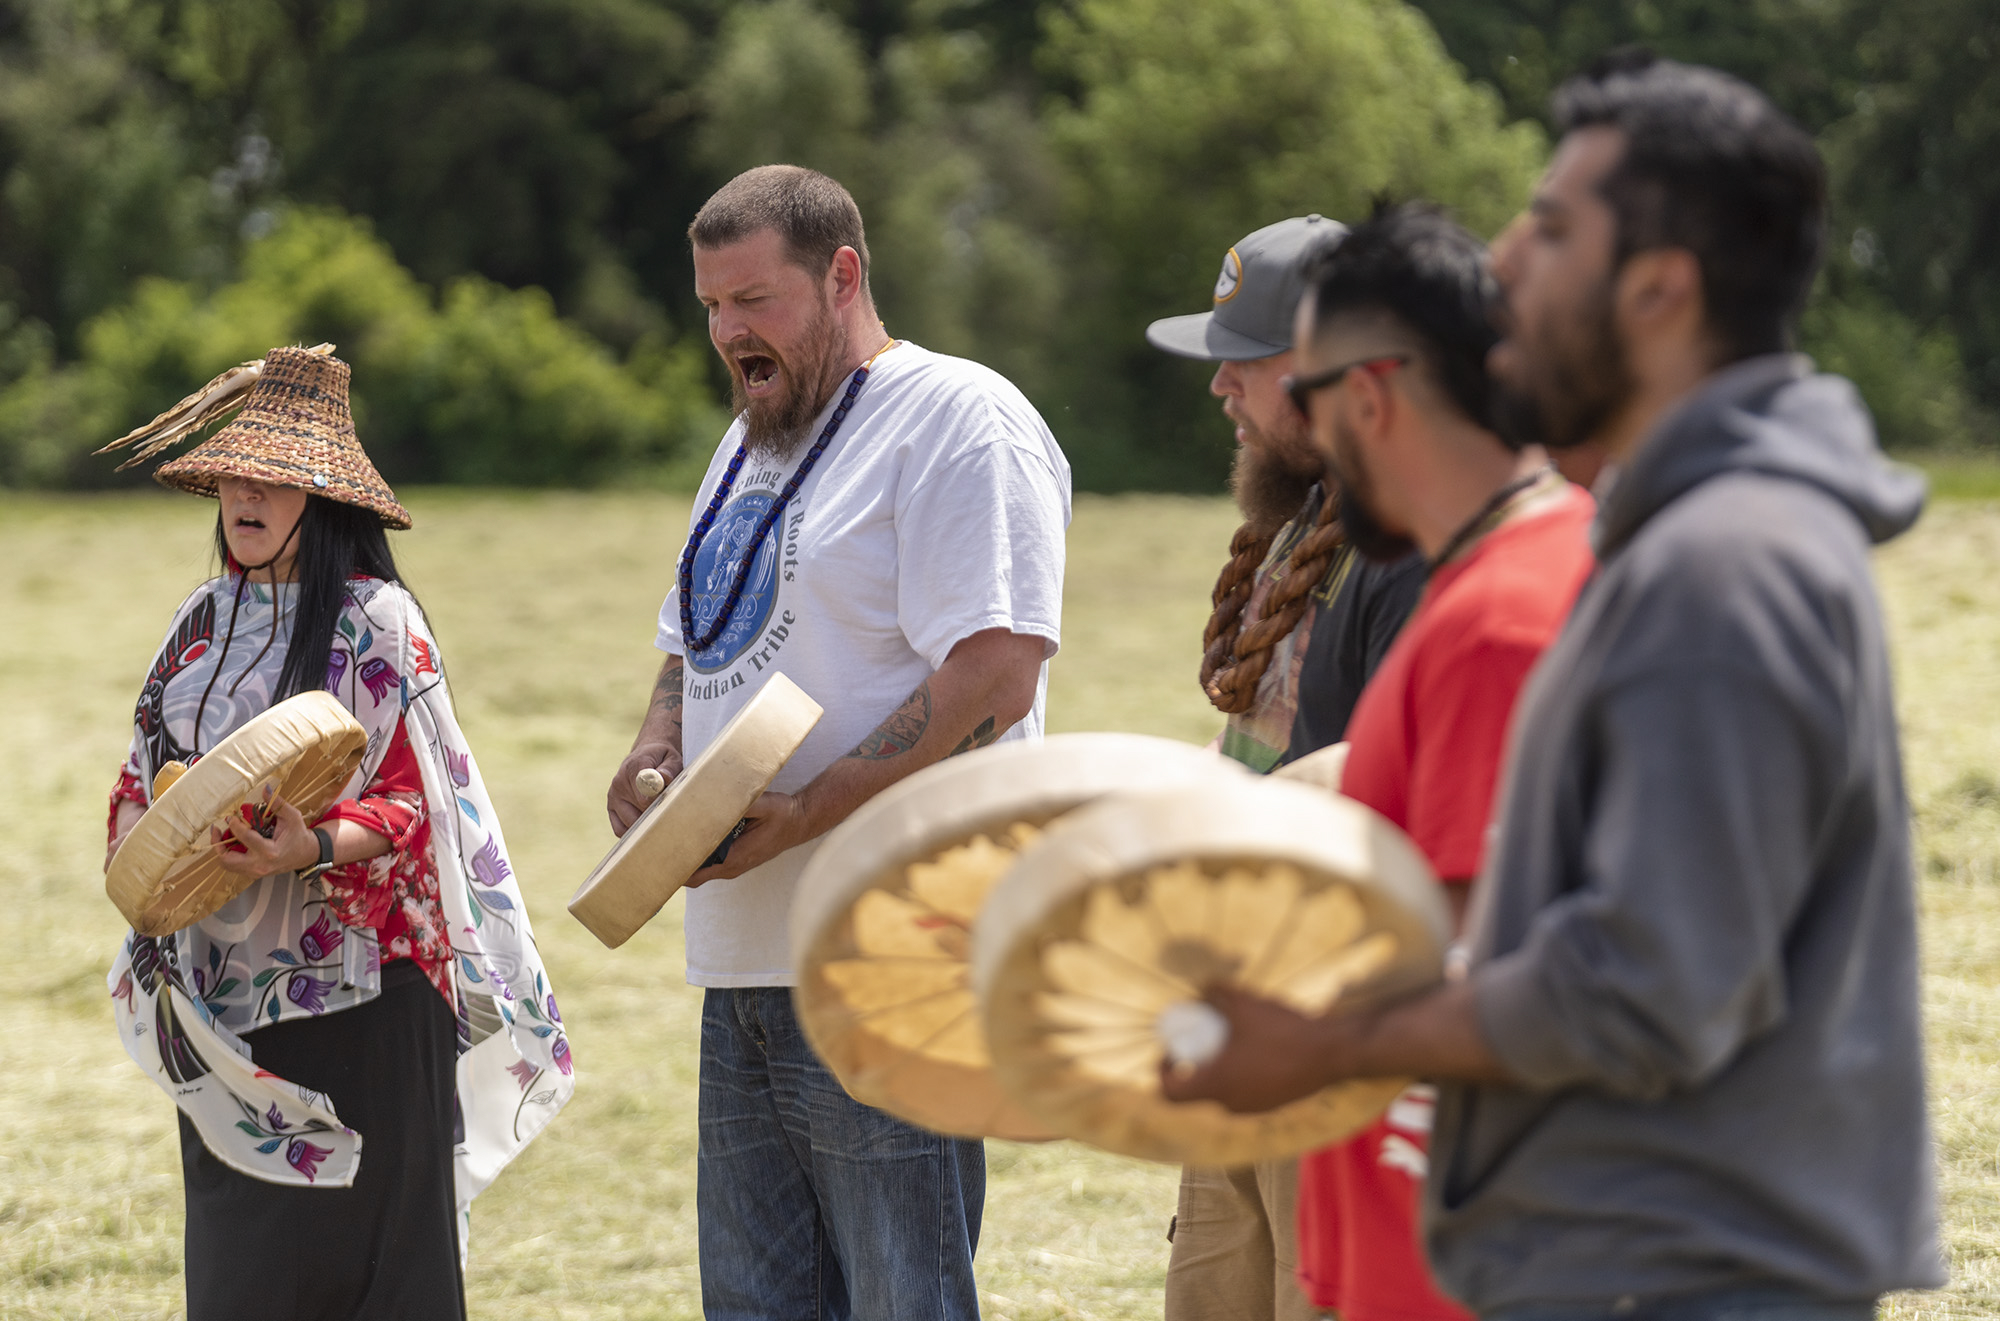 The Cowlitz Indian Tribe Drum Group performs a song Wednesday, June 1, 2022, before a groundbreaking ceremony at the future site of Clark CollegeÄôs Boschma Farms campus in Ridgefield.